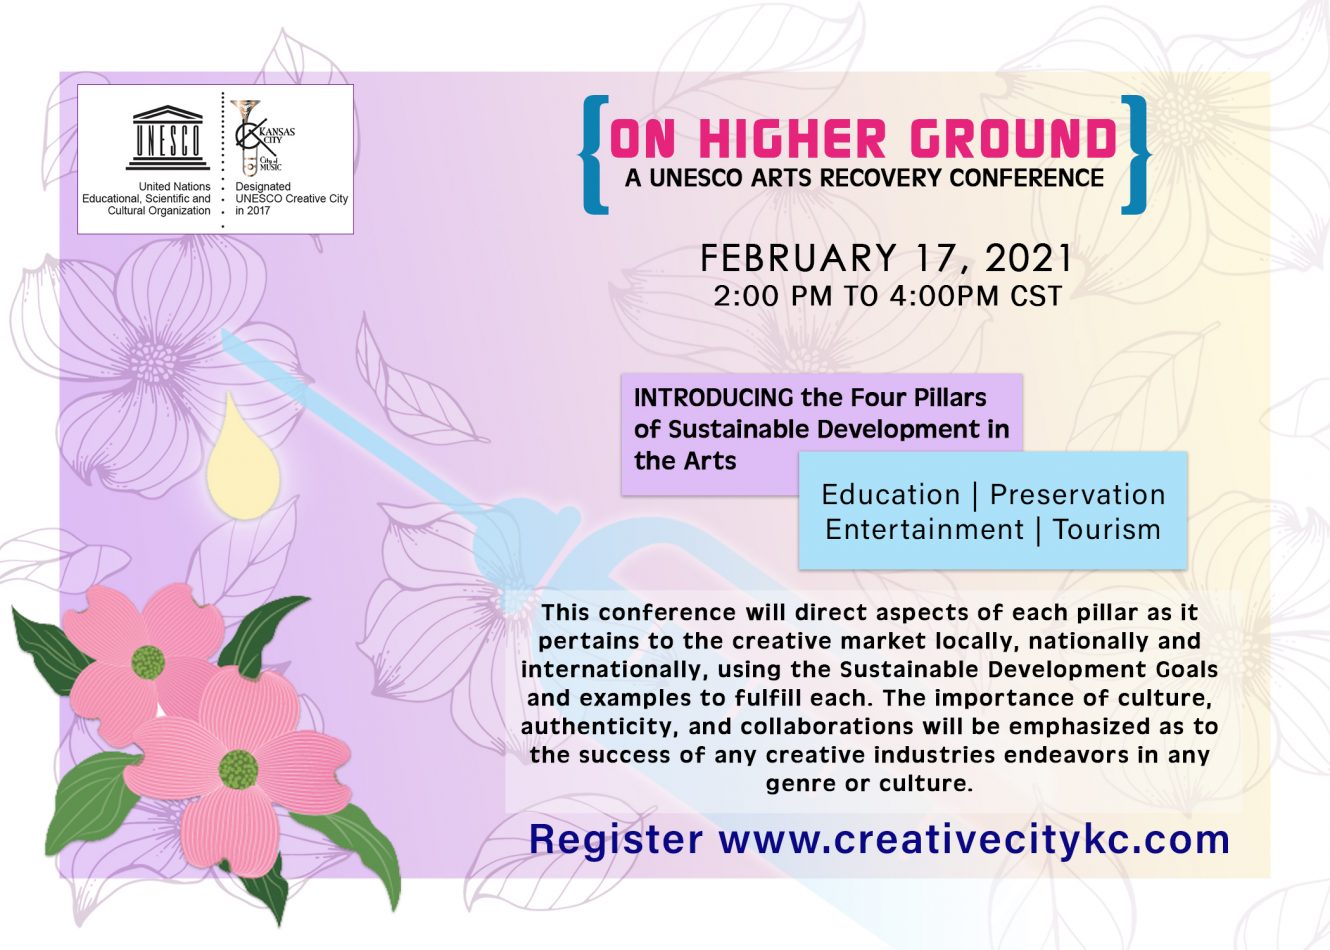 Gallery 1 - On Higher Ground | A UNESCO Arts Recovery Conference